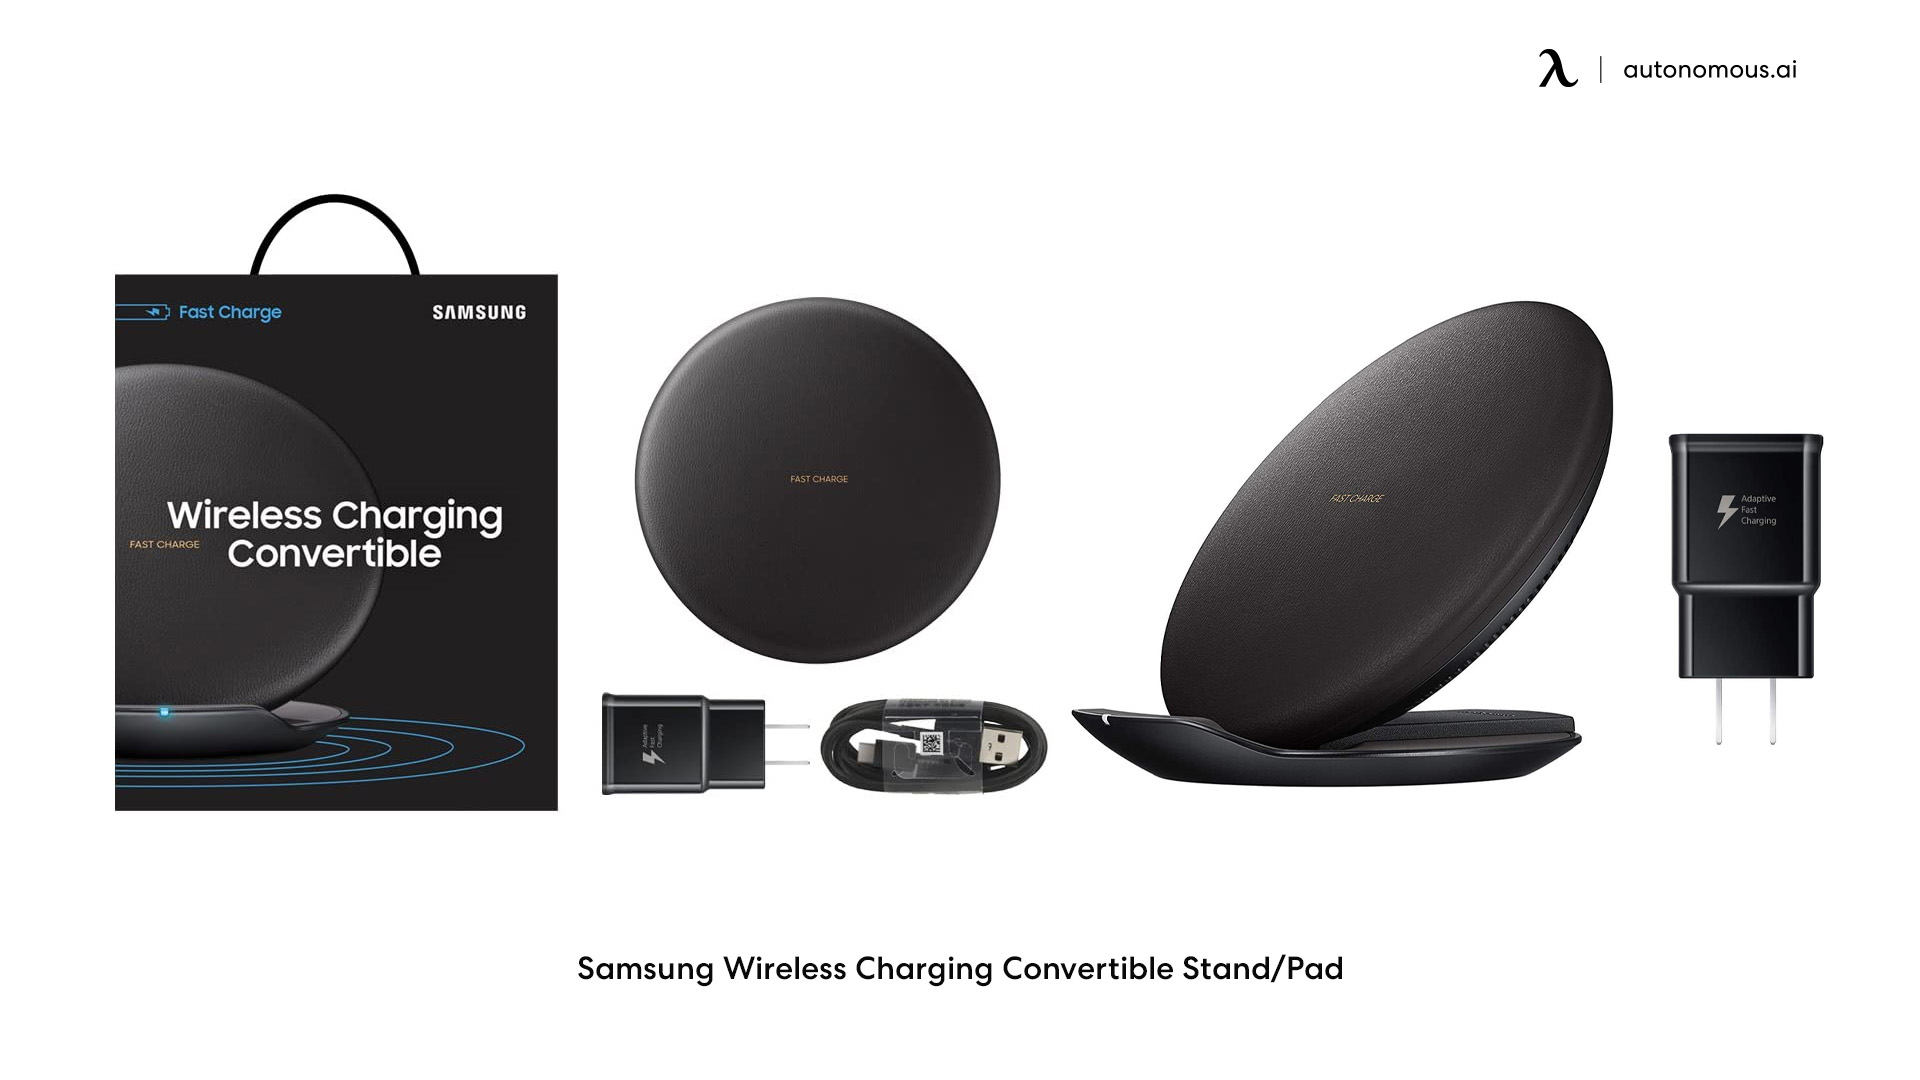 Samsung Wireless Charging Convertible Stand/Pad